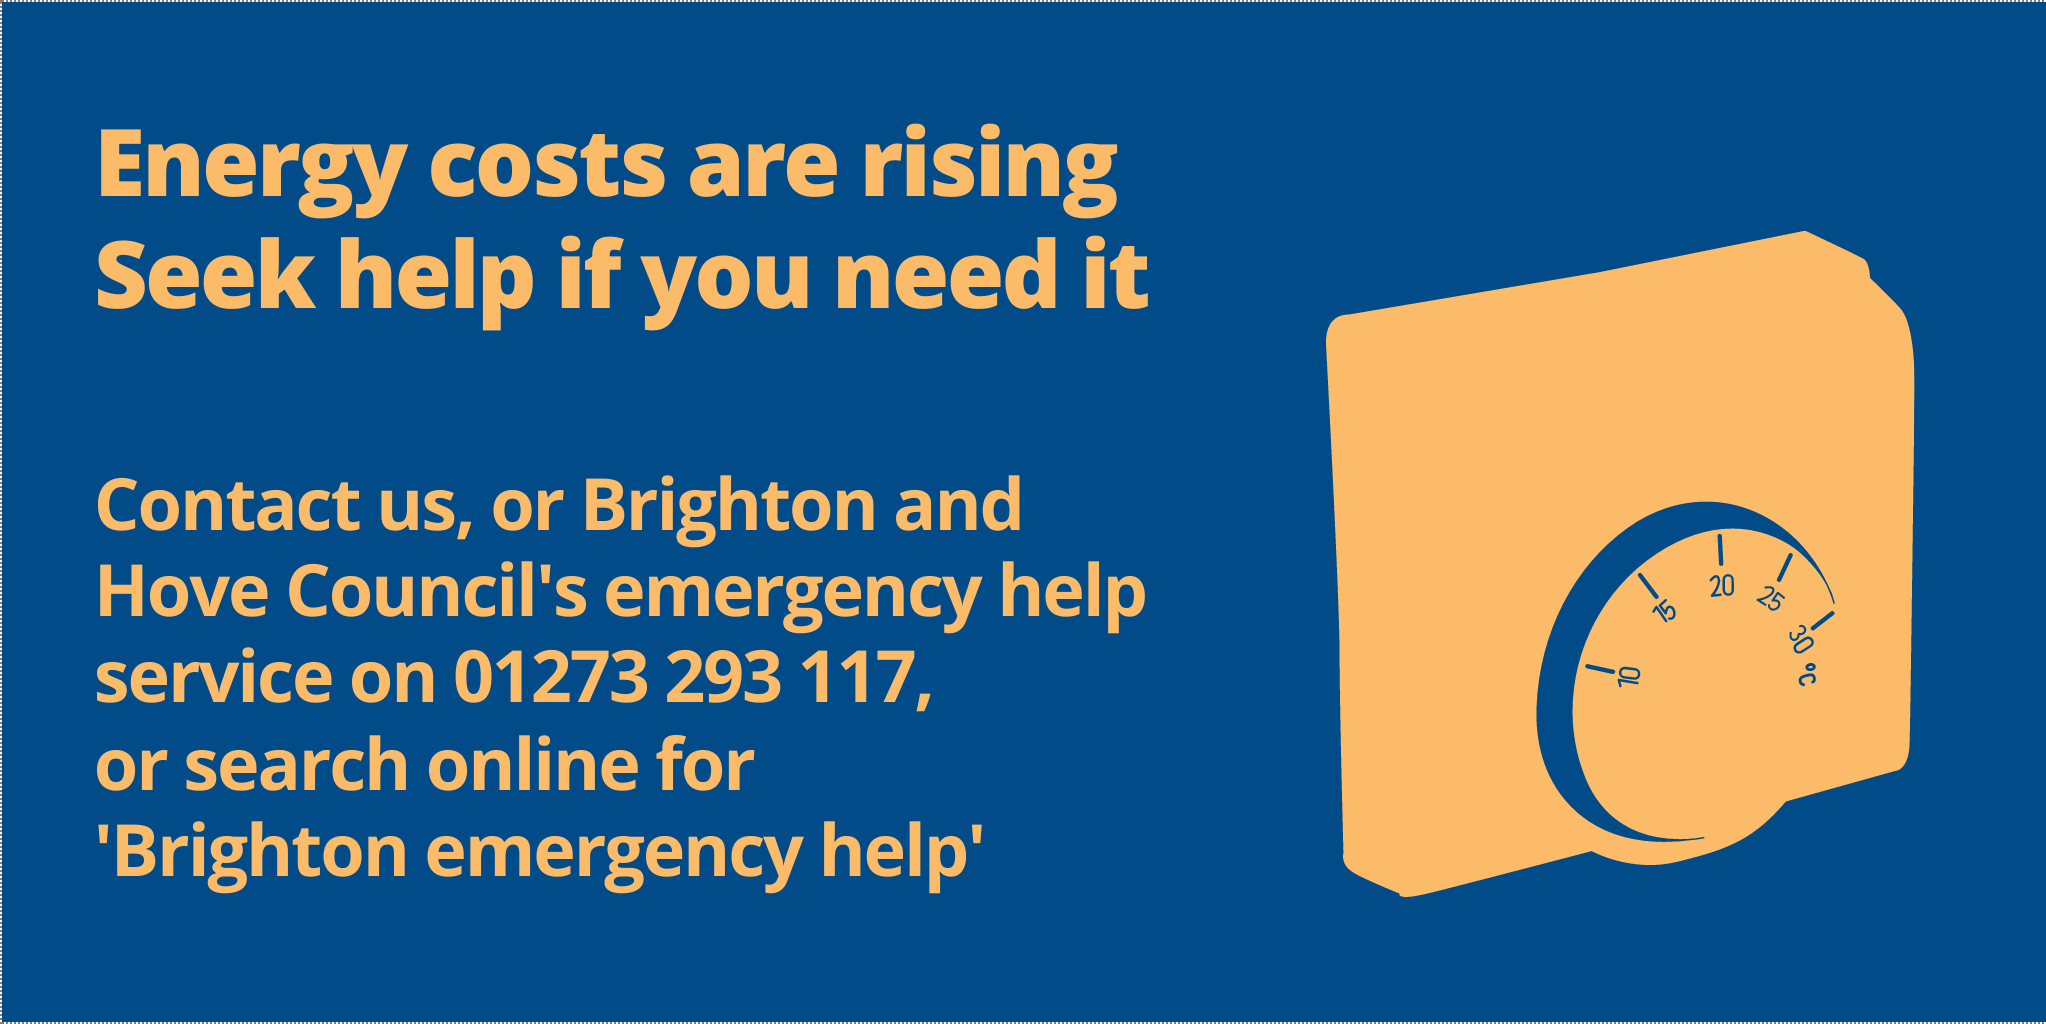 Energy costs are rising
Seek help if you need it
Contact us, or Brighton and Hove Councils' emergency help service on 01273 293 117, or search online for 'Brighton emergency help'